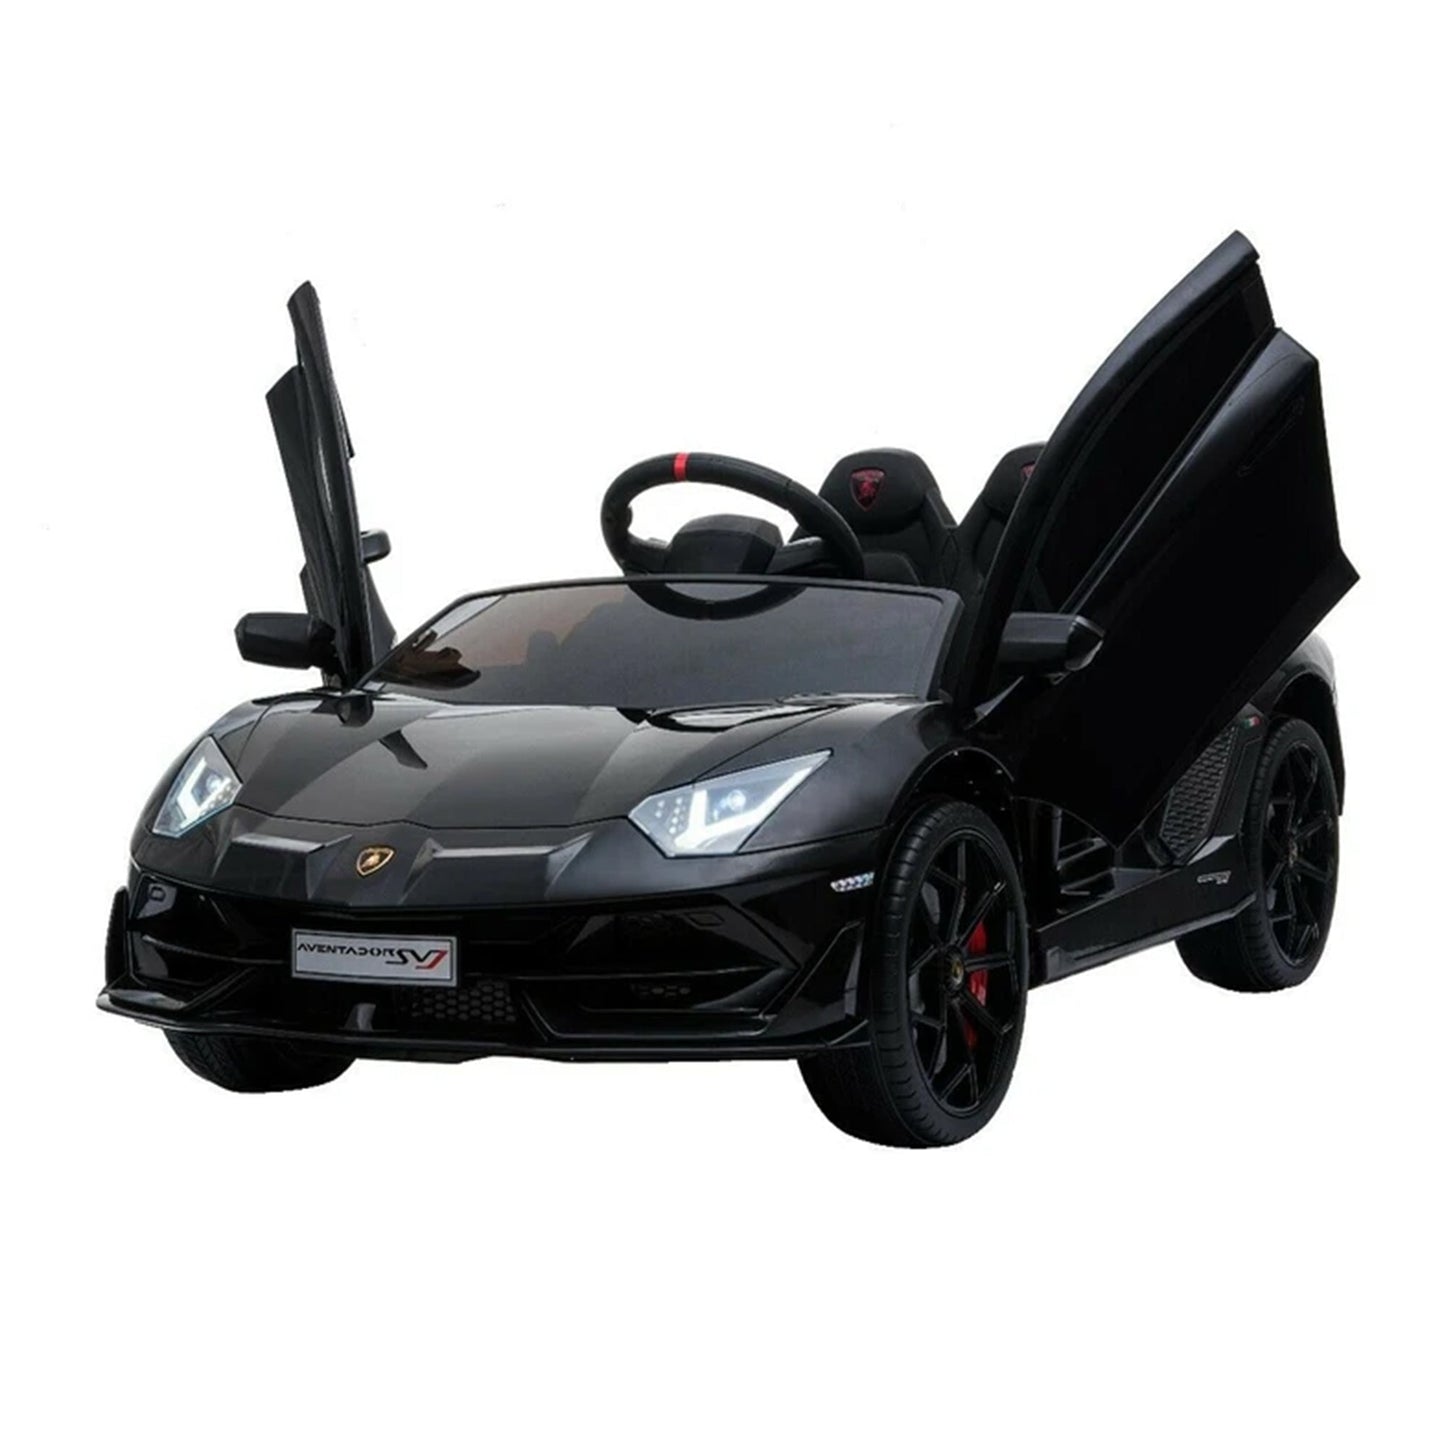 "Matt Black Lamborghini SVJ Ride On for Kids at Kids Car Store featuring 2.4G Parent Remote Control and 12 Volt against white background."